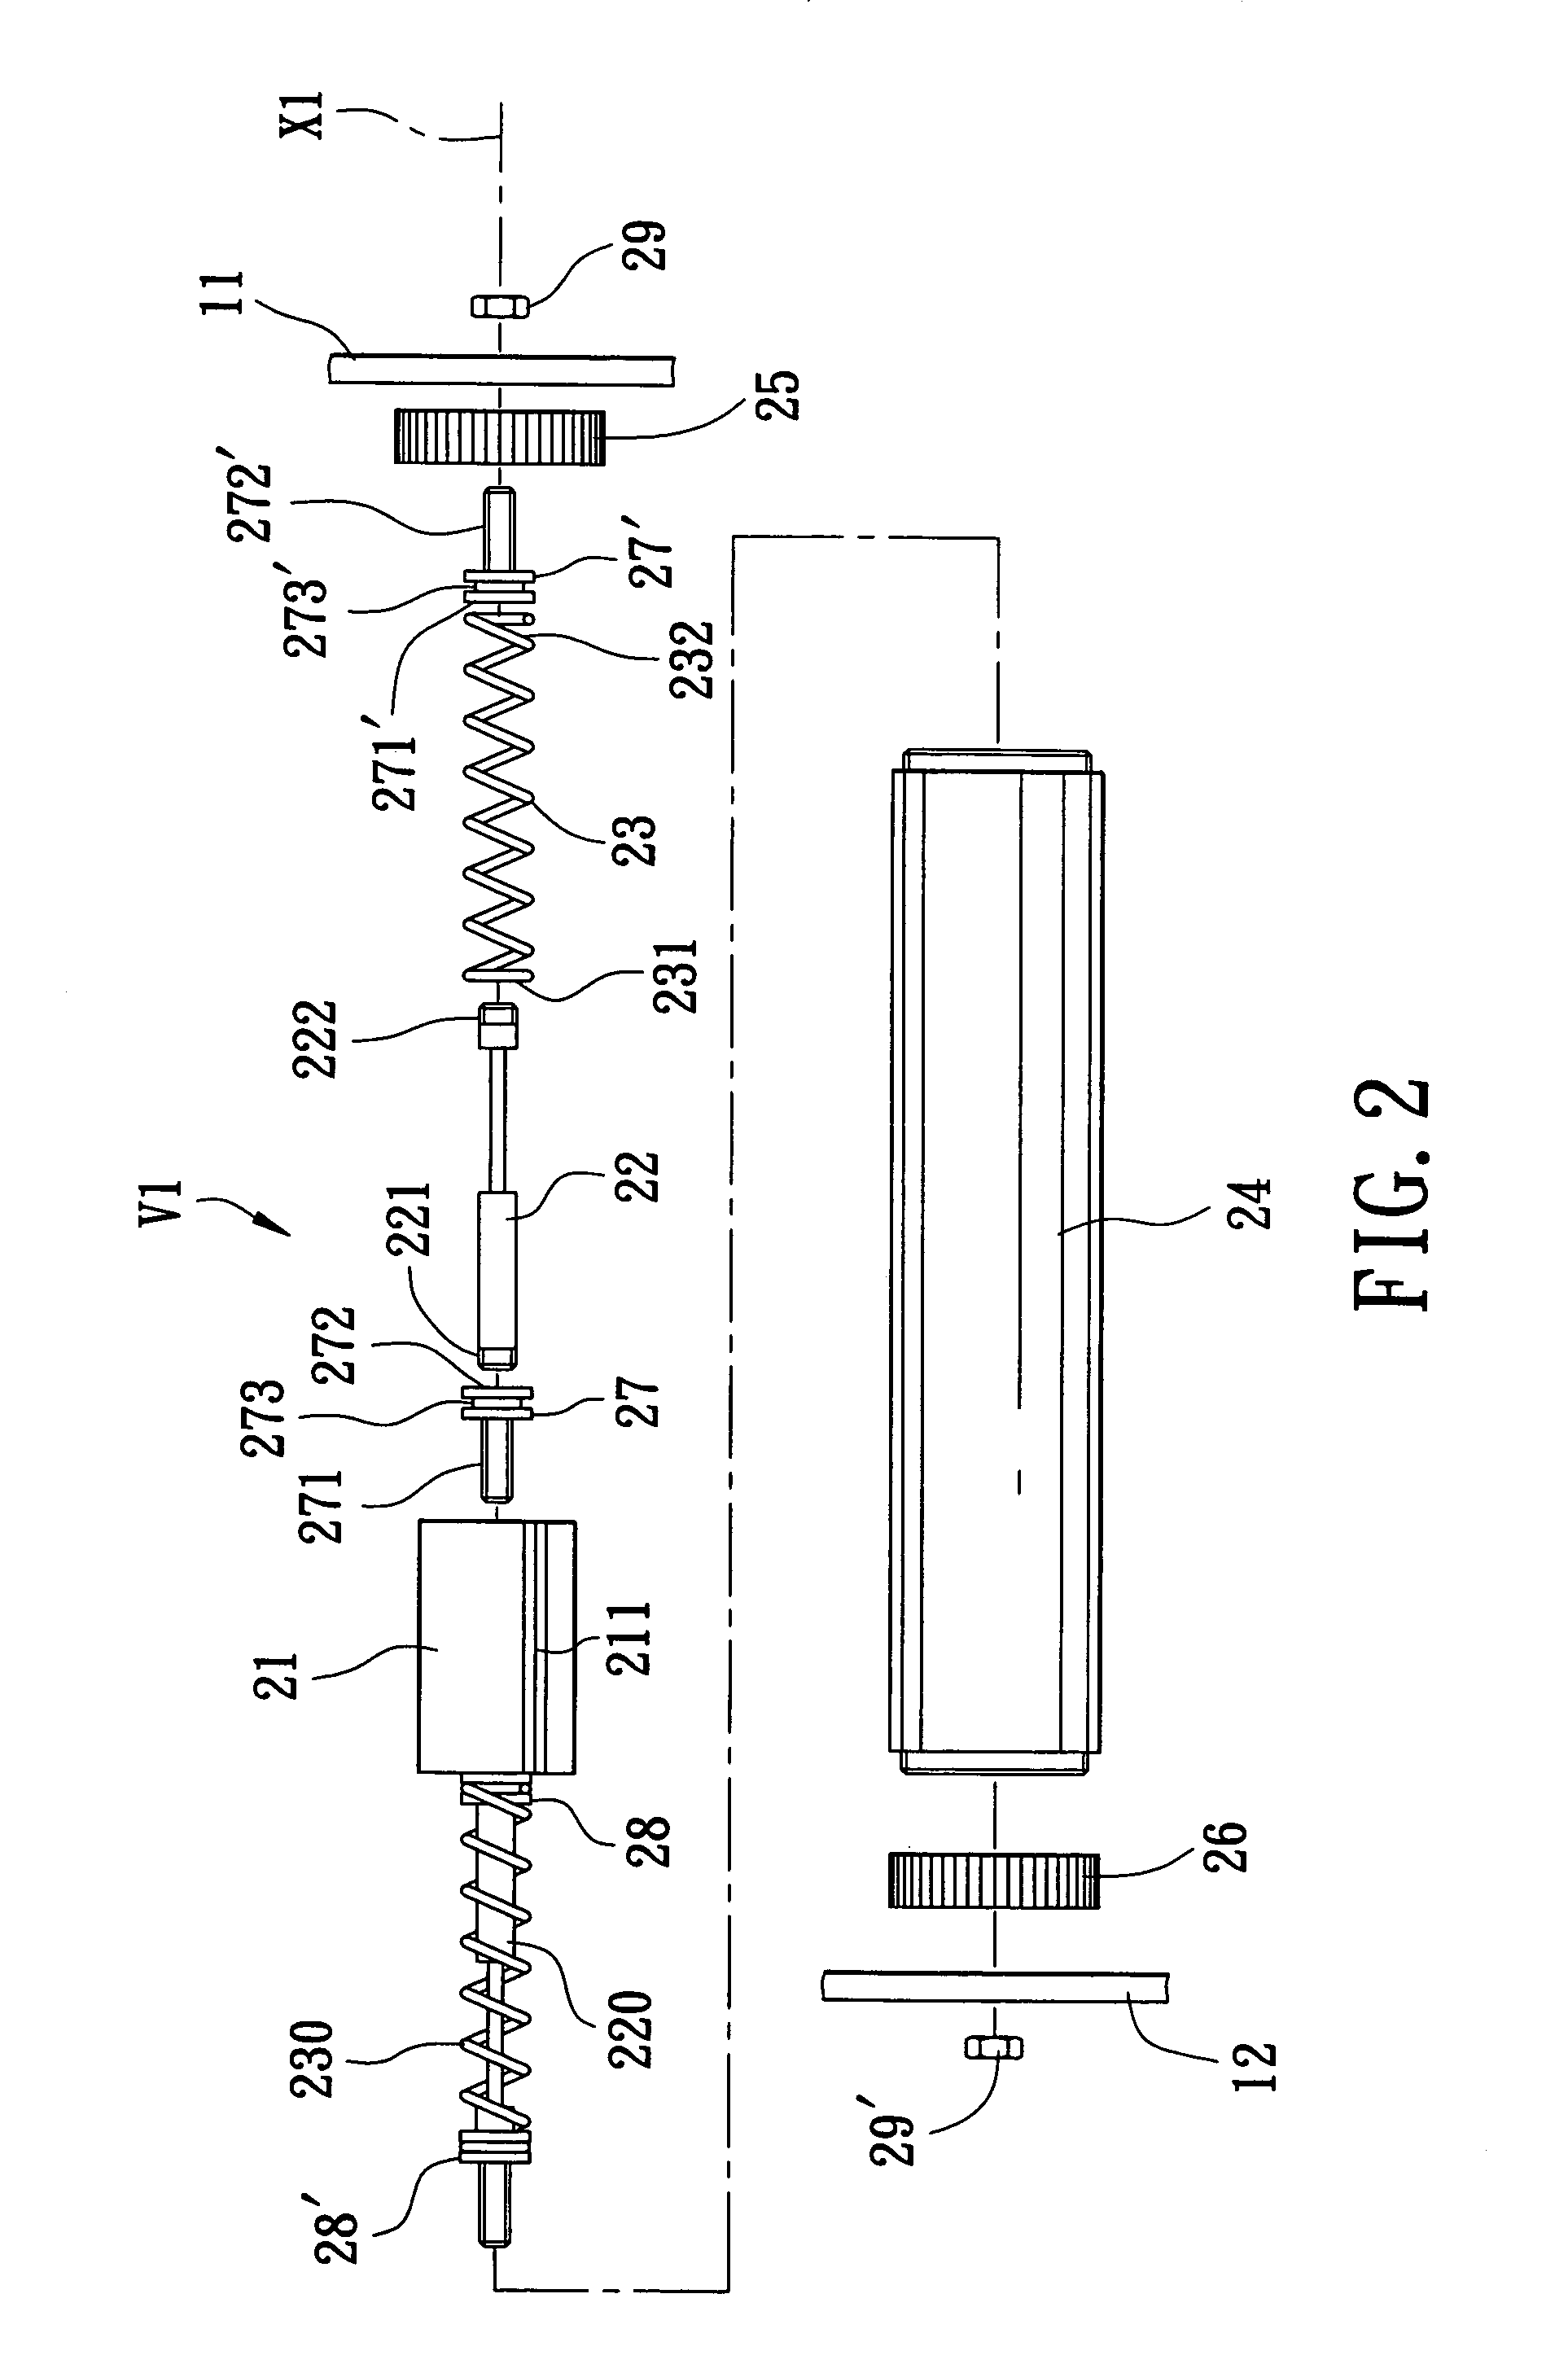 Anti-seismic device with vibration-reducing units arranged in parallel